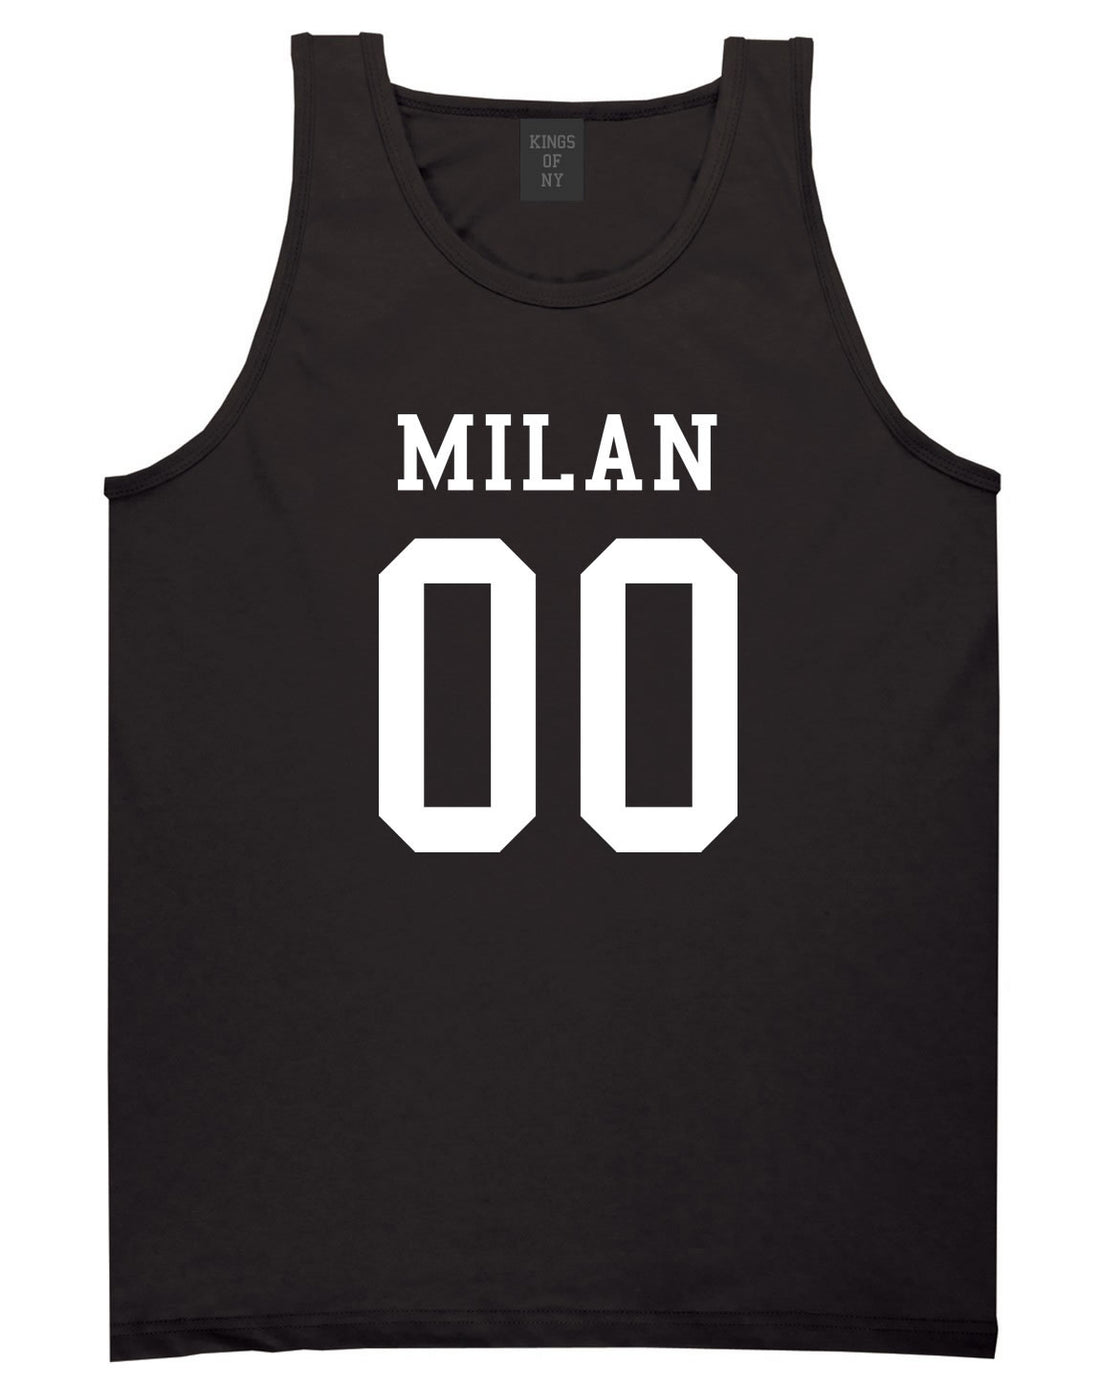 Milan Team 00 Jersey Tank Top in Black By Kings Of NY